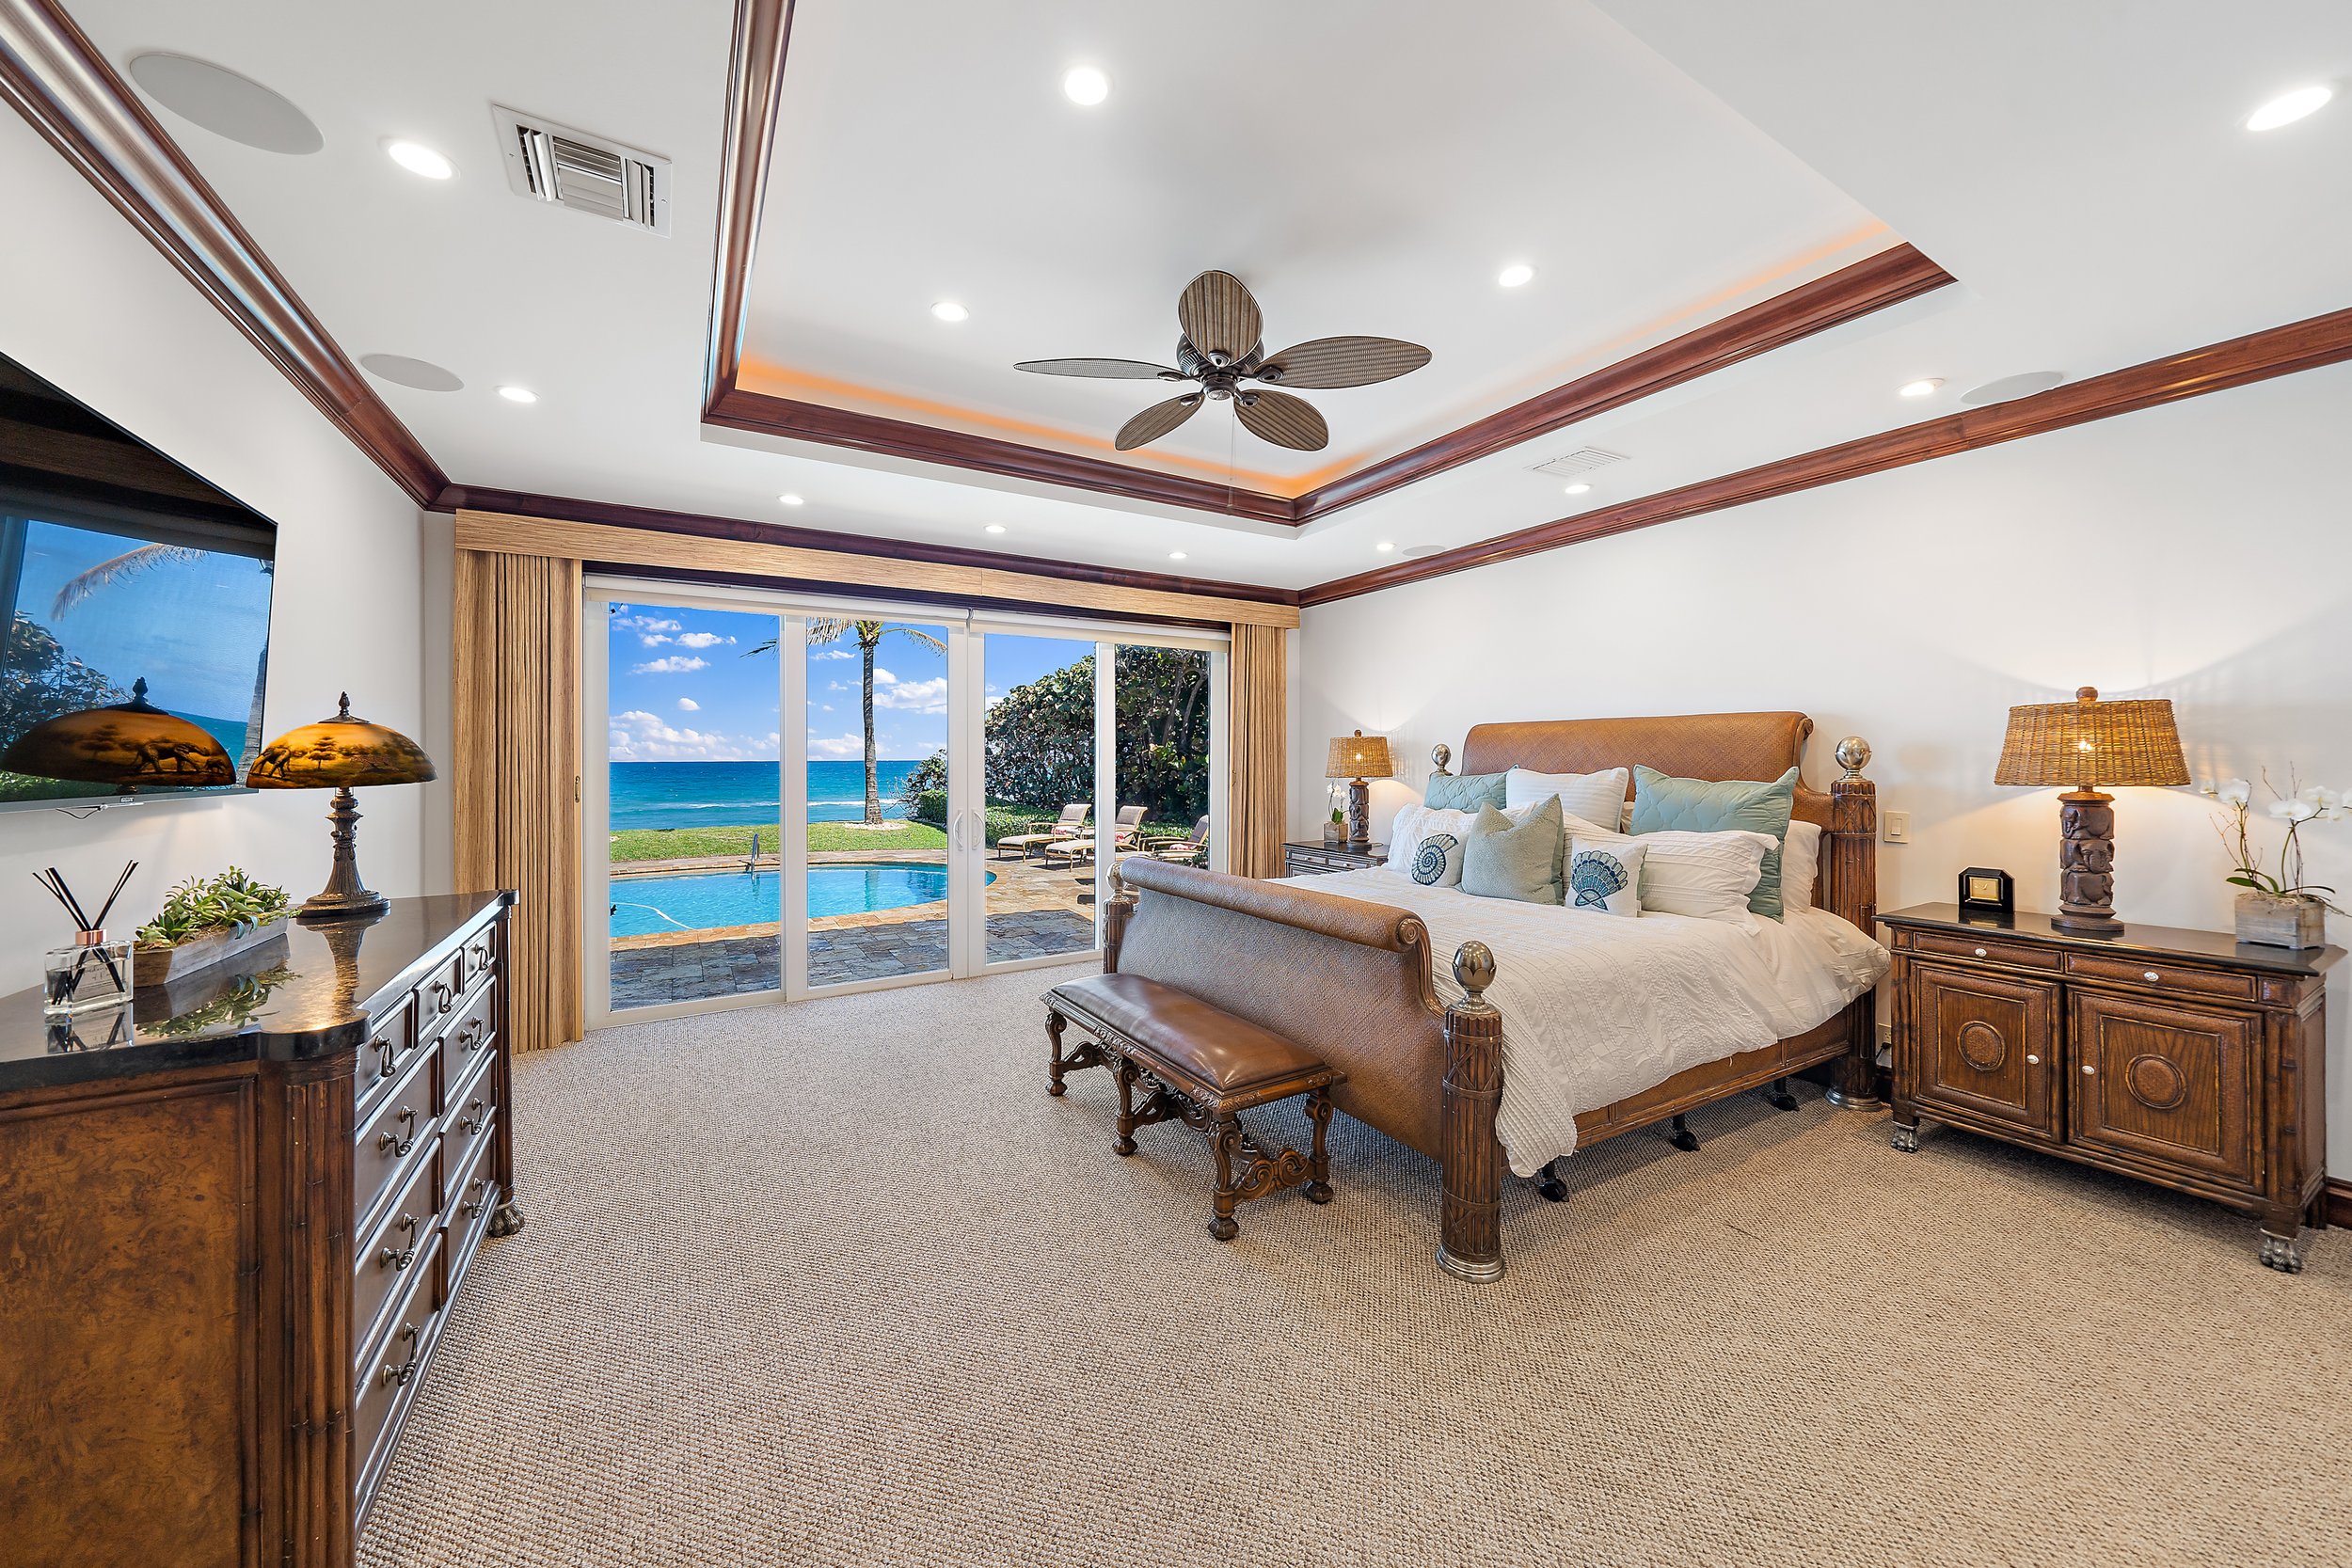 Tour A Jupiter Beachfront Mansion Owned By Clyde R. %22Buzz%22 Gibb Which Is Asking $24.9 Million 127.jpg